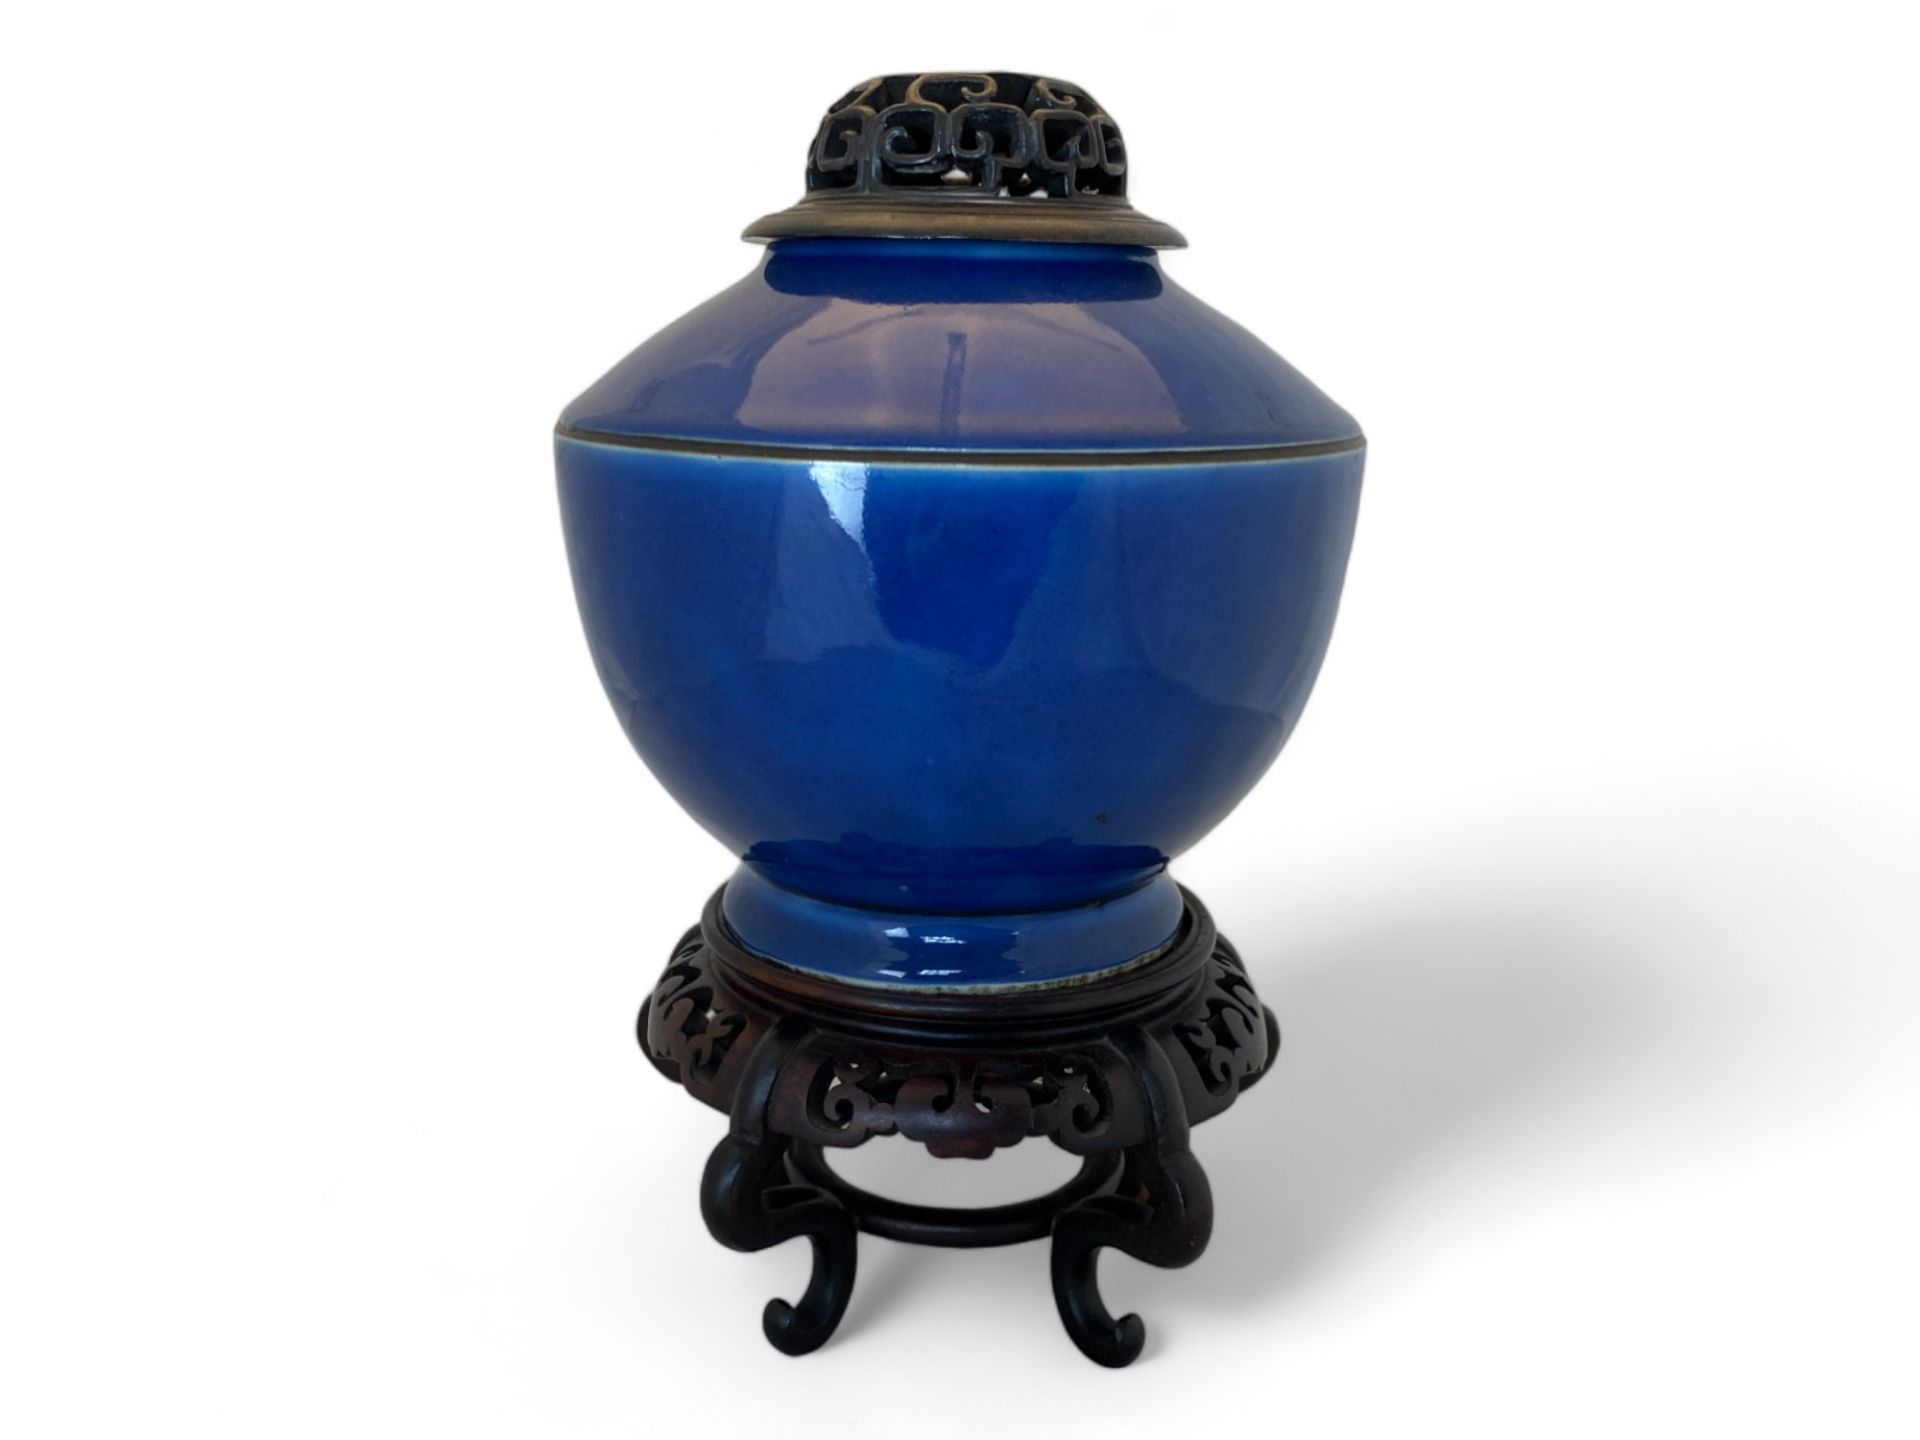 An 18th century Chinese porcelain monochrome blue vase with a pierced hardwood carved cover and stan